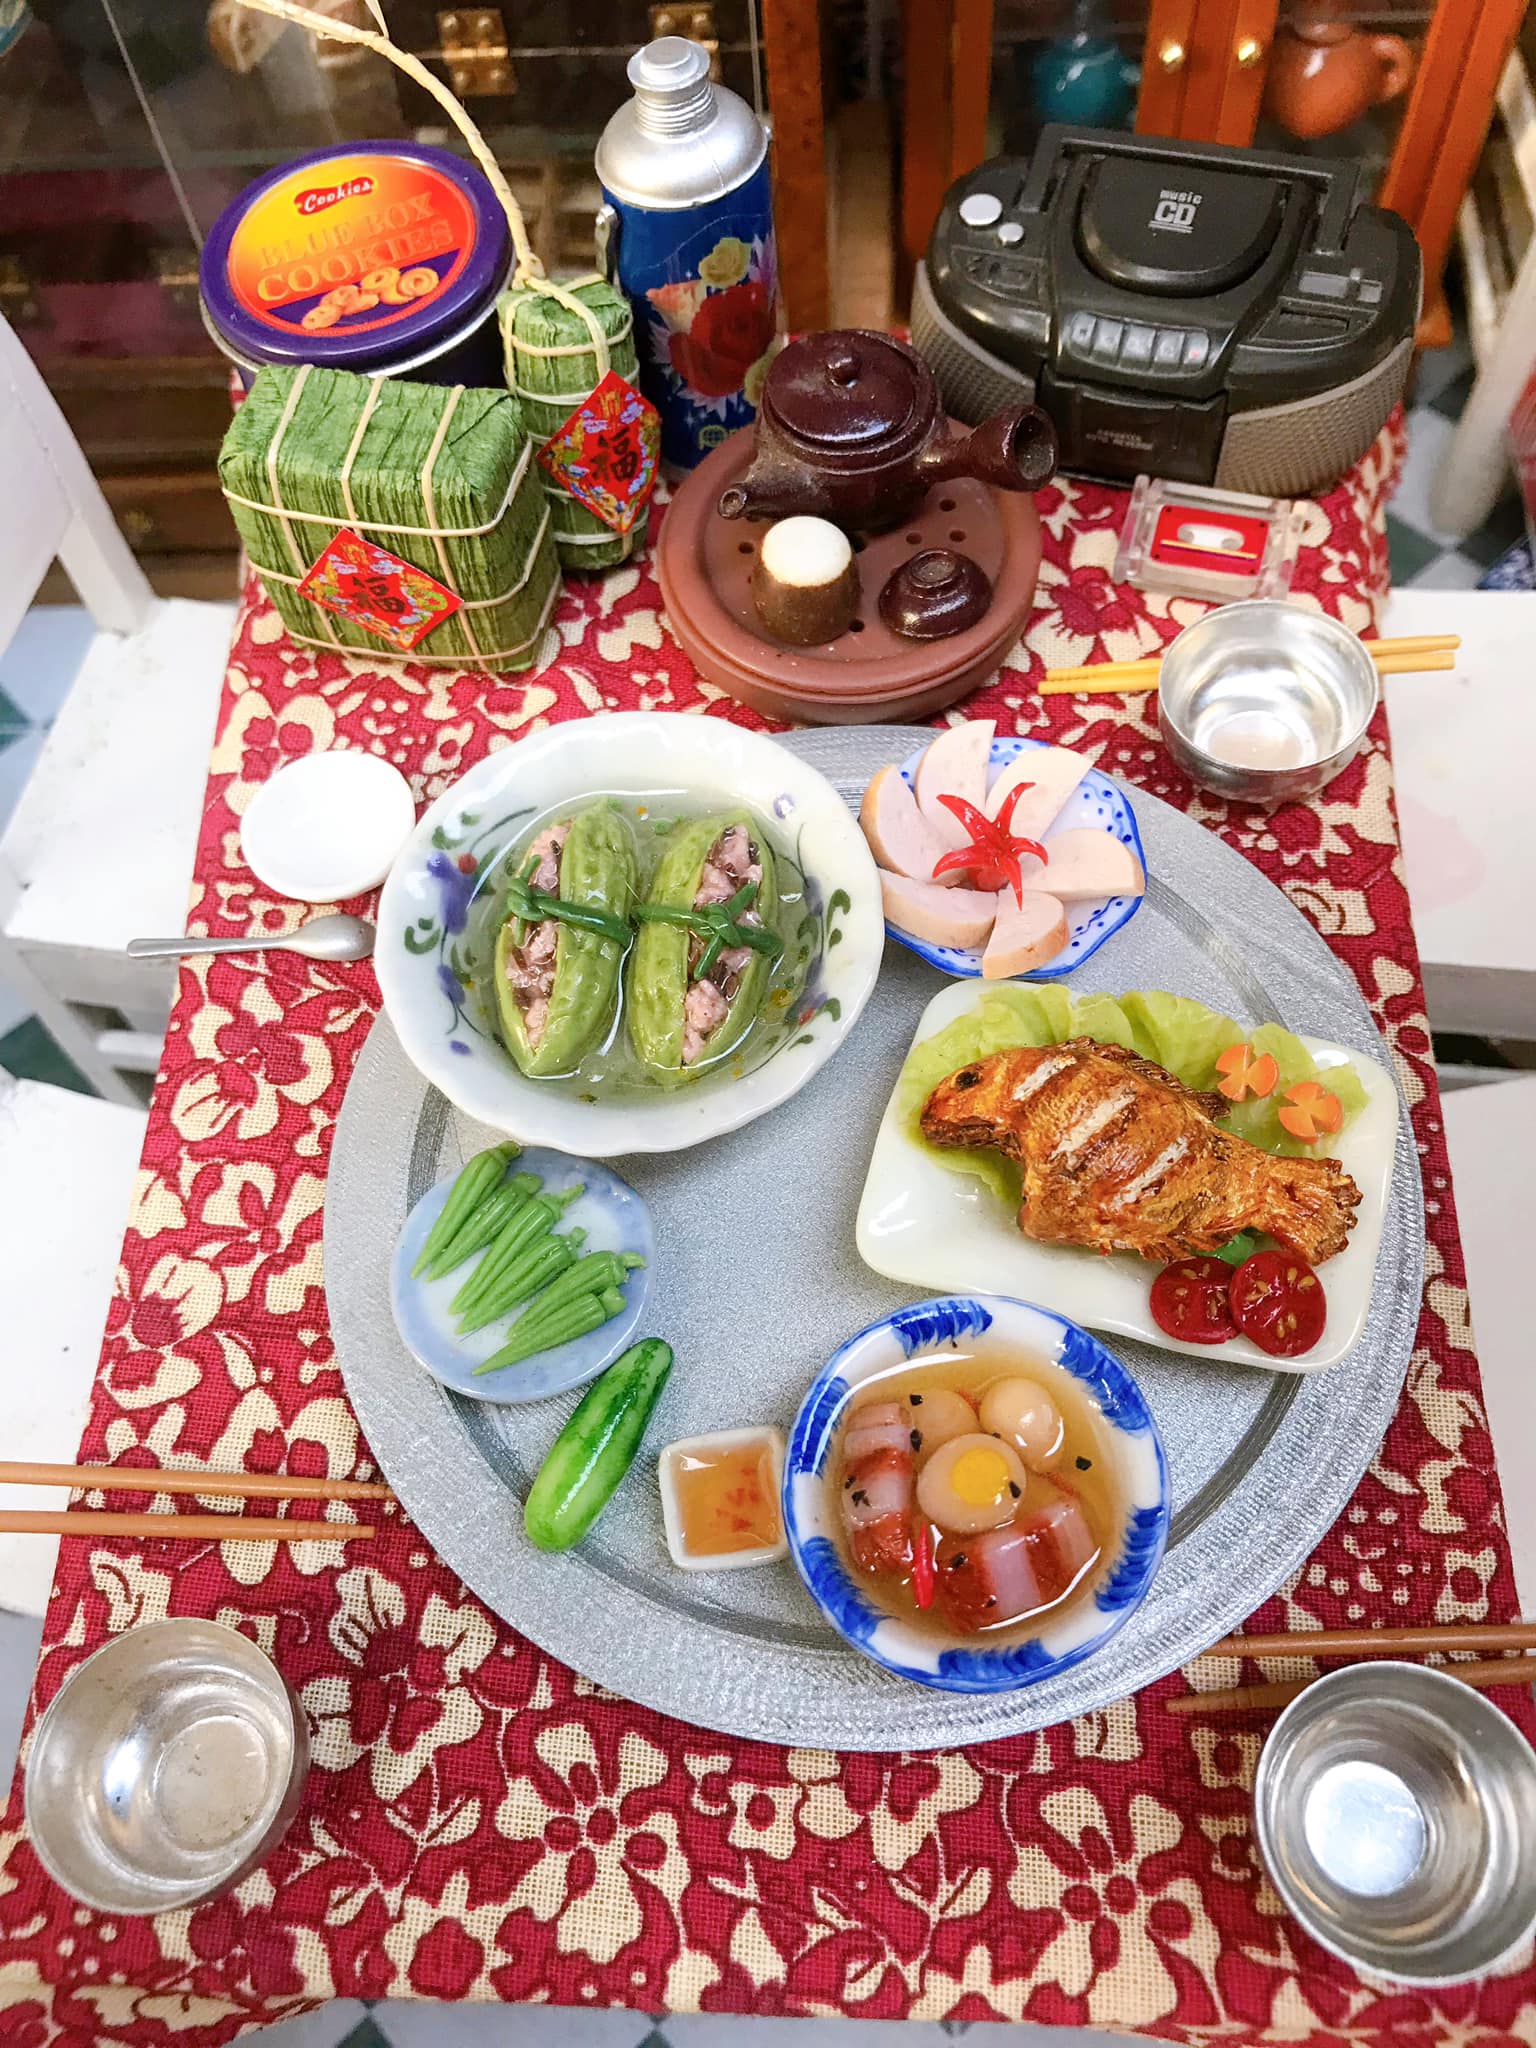 A traditional Vietnamese meal during the Lunar New Year holiday. Photo: Pham Thuy Thanh Thao